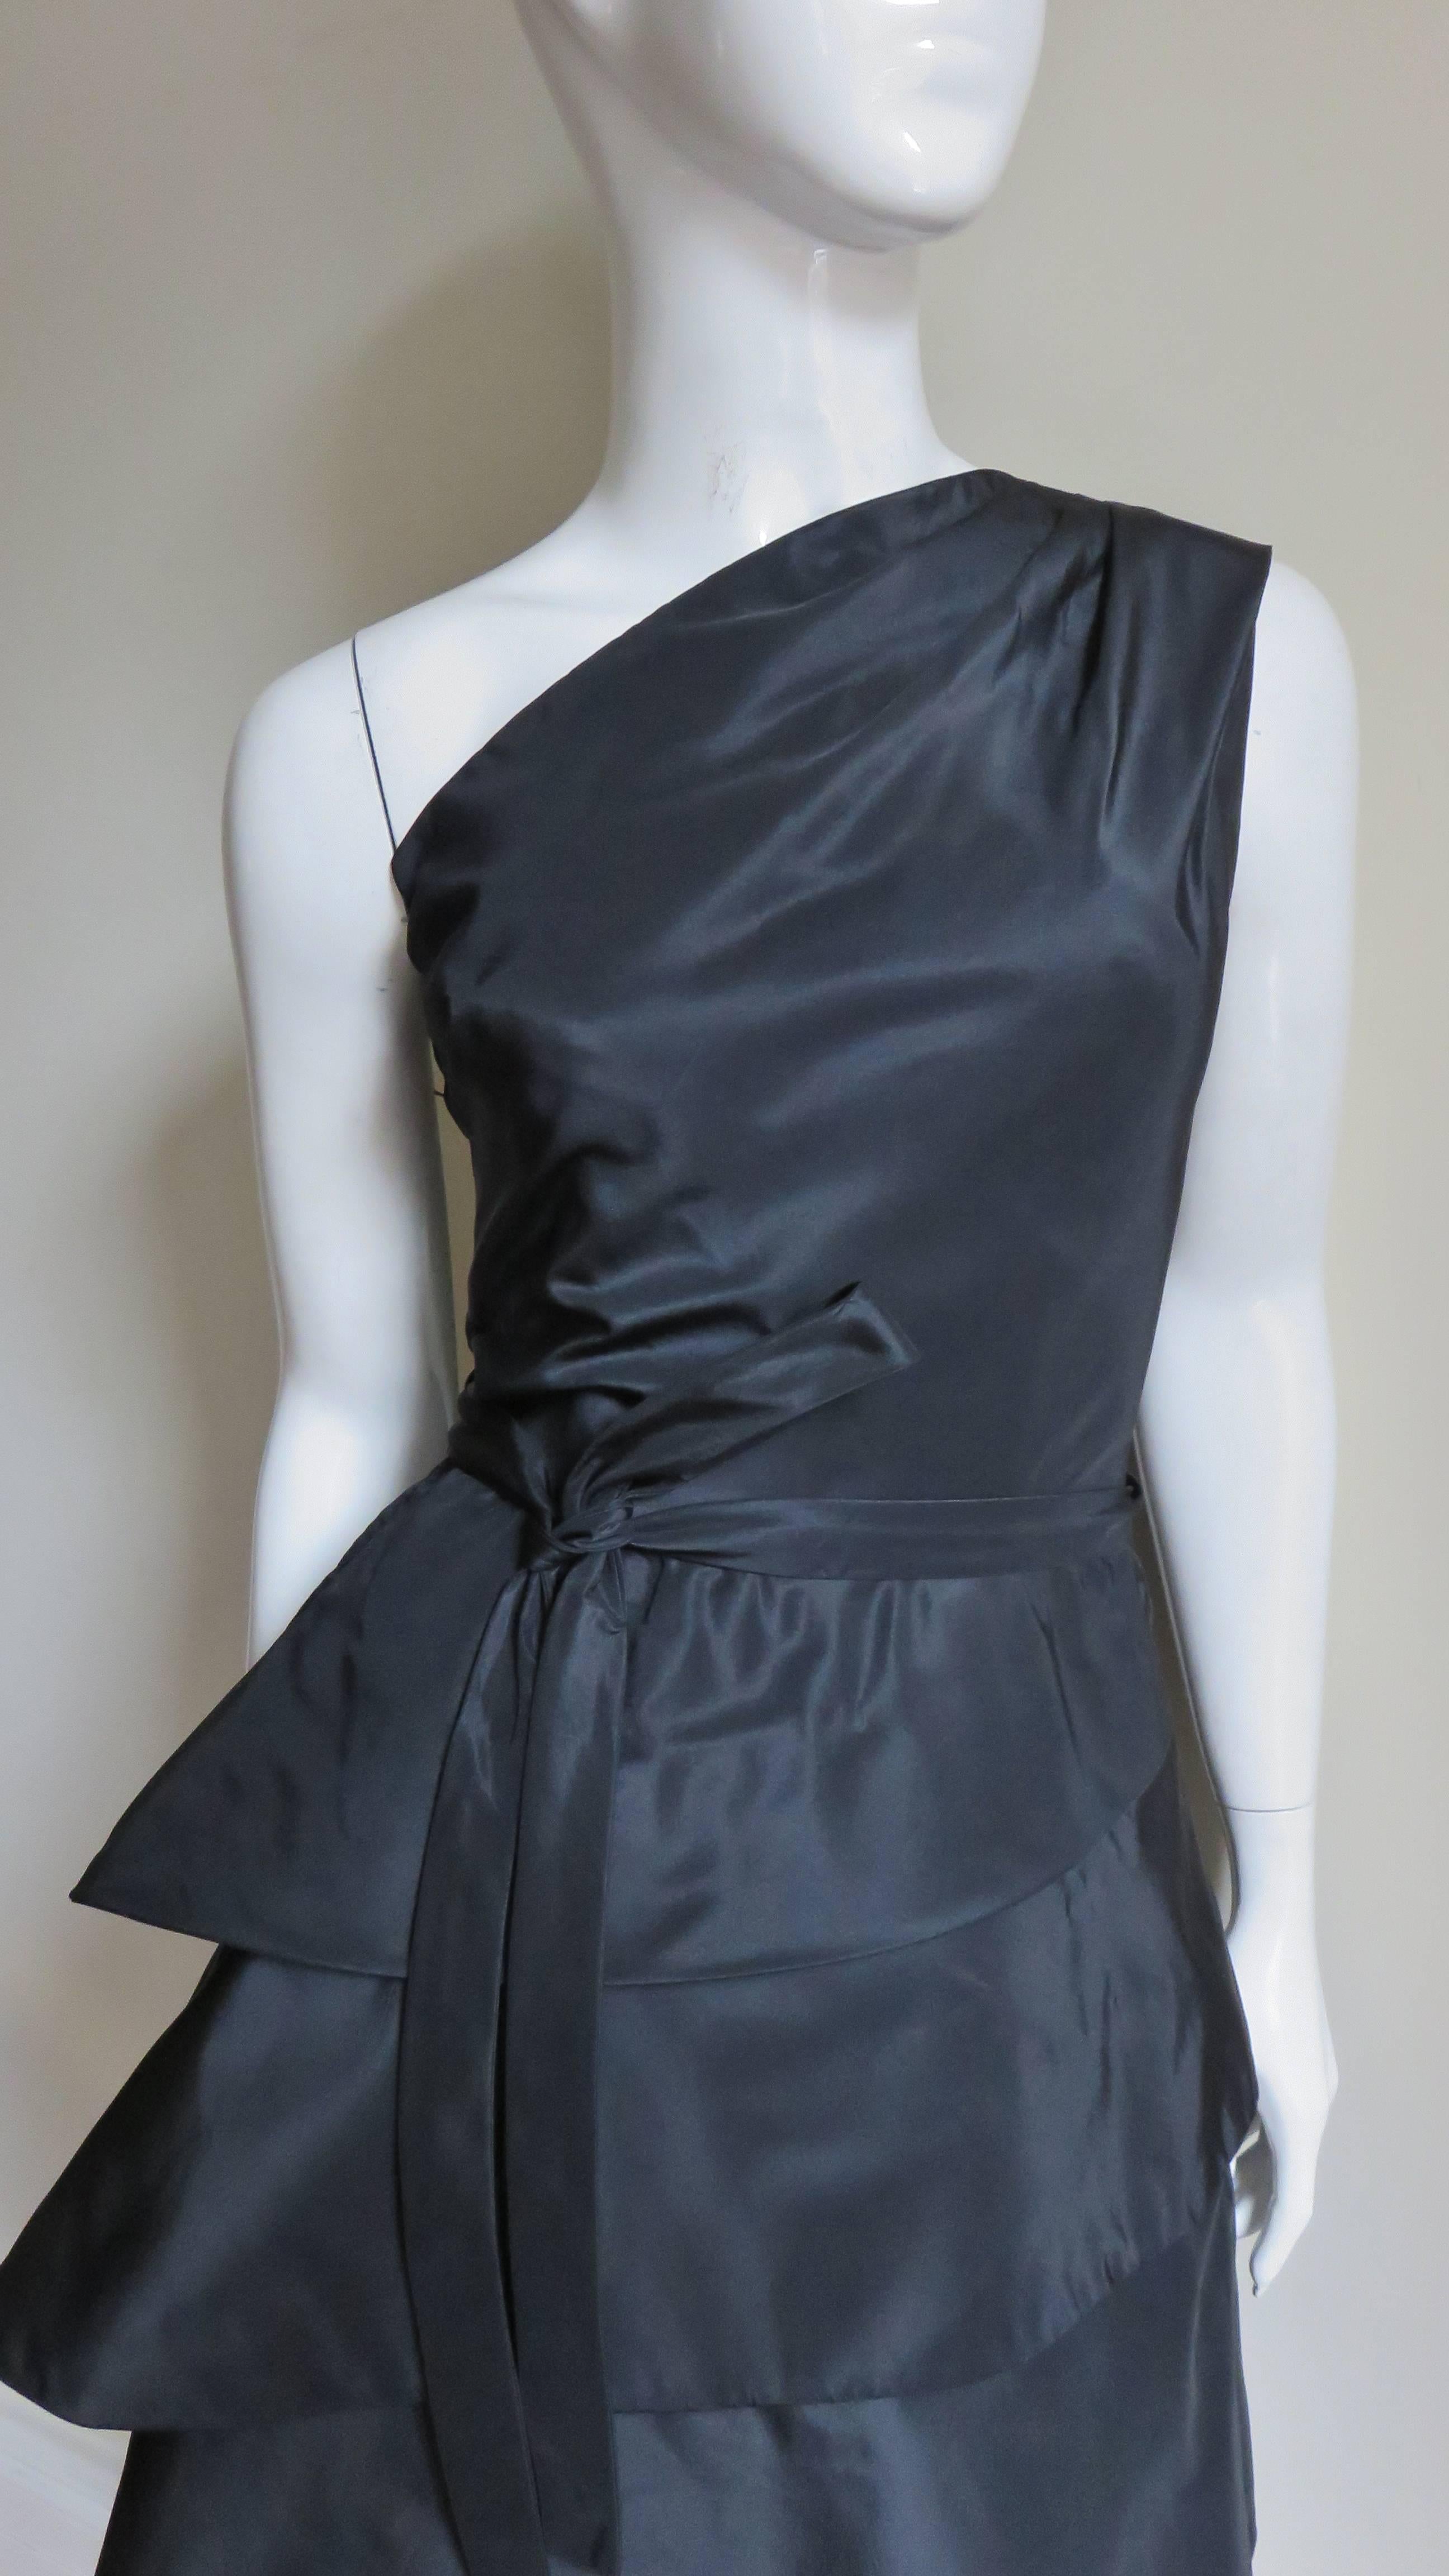 A stunning sculptural dress from Werle, Beverly Hills in black silk peau de soie. The one shoulder has 3 pleats front and back releasing into fitted bodice with an inner boned corset. The skirt consists of flared fabric wrapping around 3 times on an